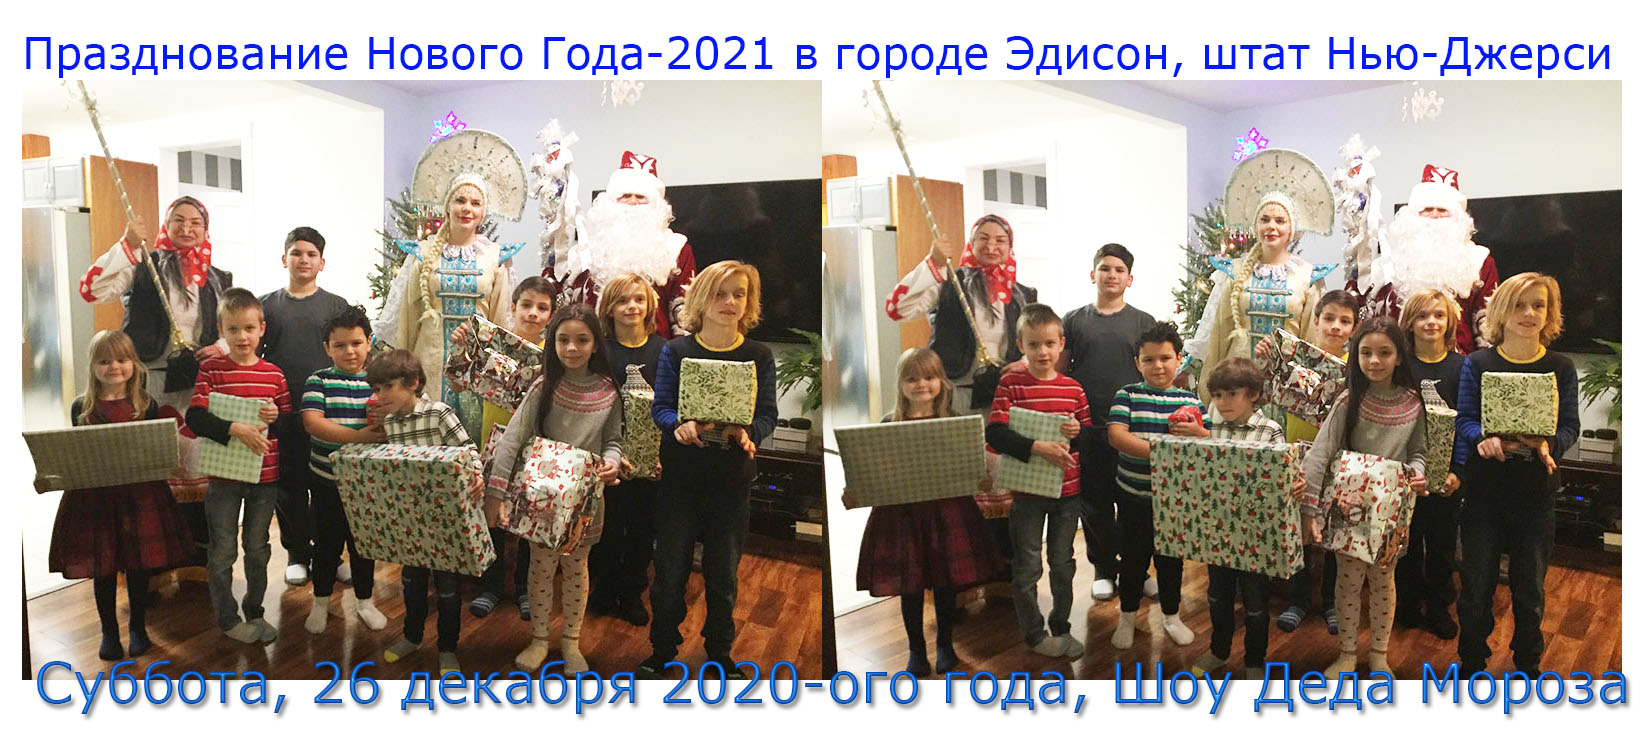 Saturday, December 26th, 2020, Ded Moroz Show in Edison, New Jersey, Middlesex County, Ded Moroz Show, Snegurochka, Ded Moroz, Baba Yaga, New Year's Celebration 2021,     -,  , ,  ,   -2021,  -,   ,  